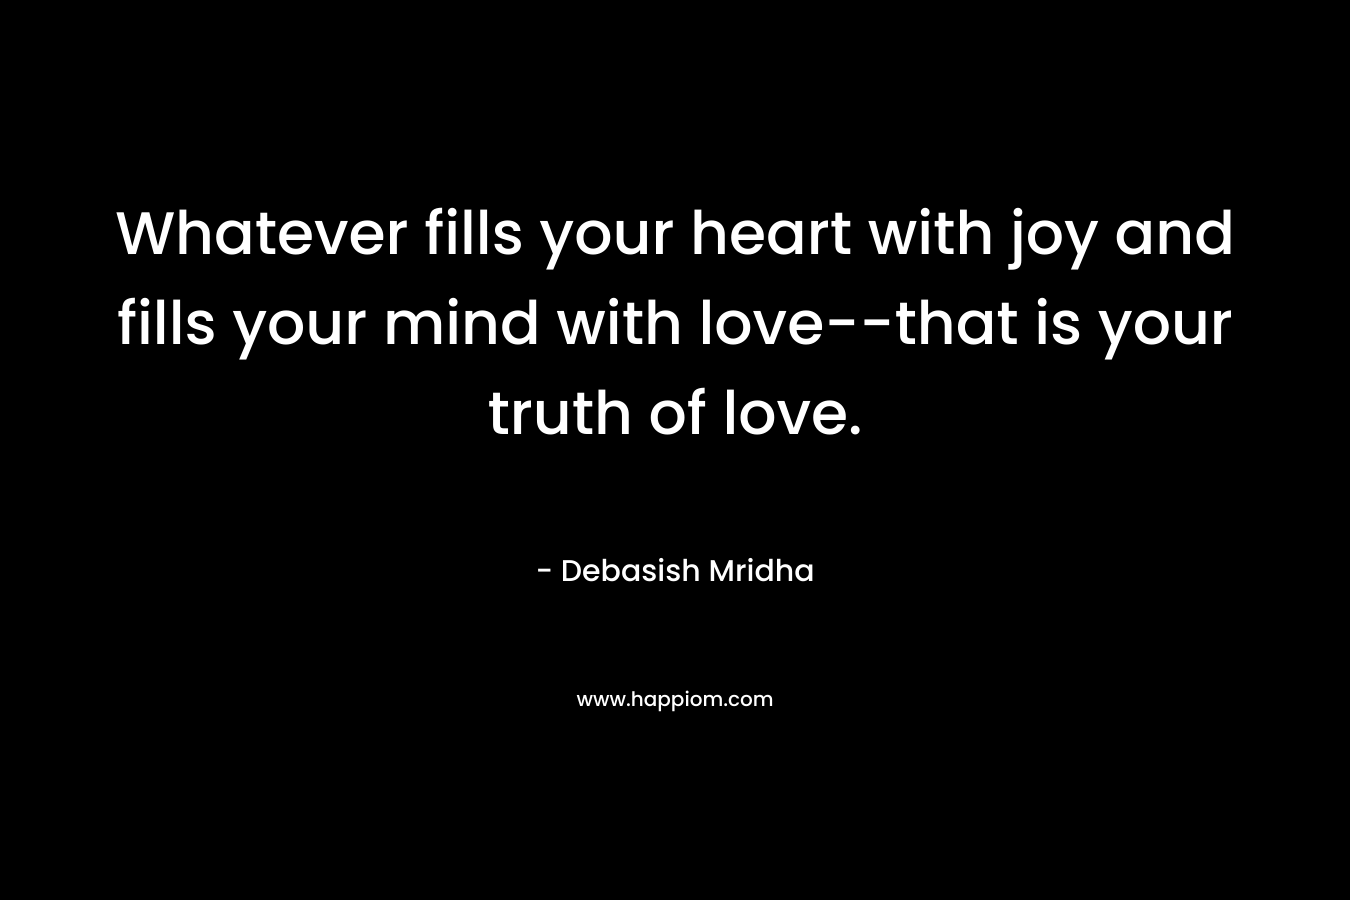 Whatever fills your heart with joy and fills your mind with love--that is your truth of love.